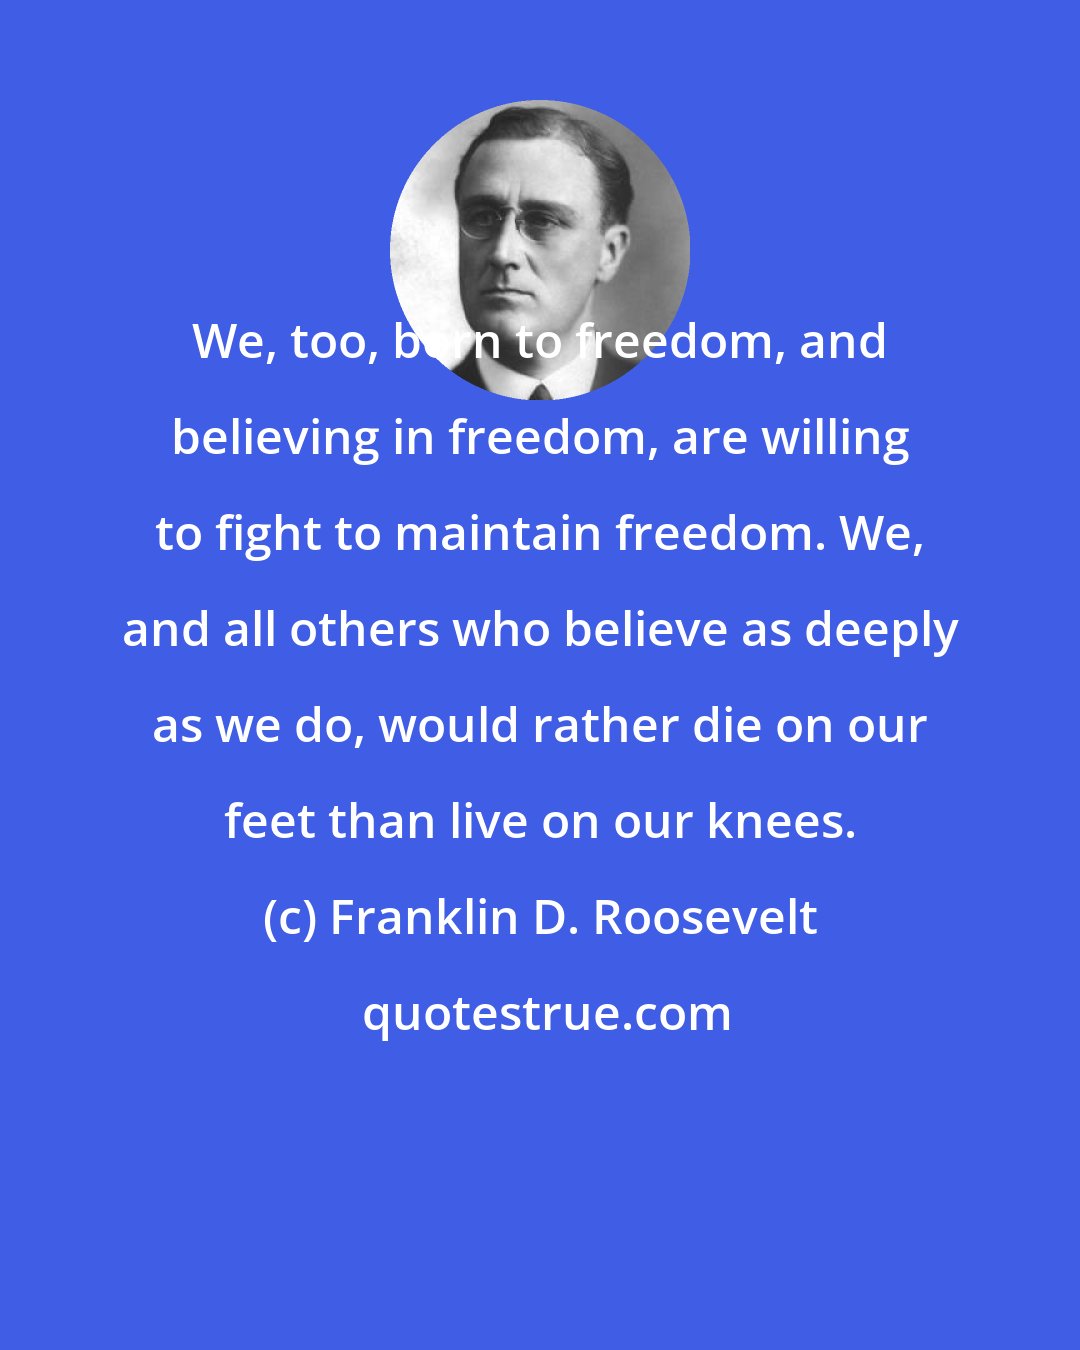 Franklin D. Roosevelt: We, too, born to freedom, and believing in freedom, are willing to fight to maintain freedom. We, and all others who believe as deeply as we do, would rather die on our feet than live on our knees.